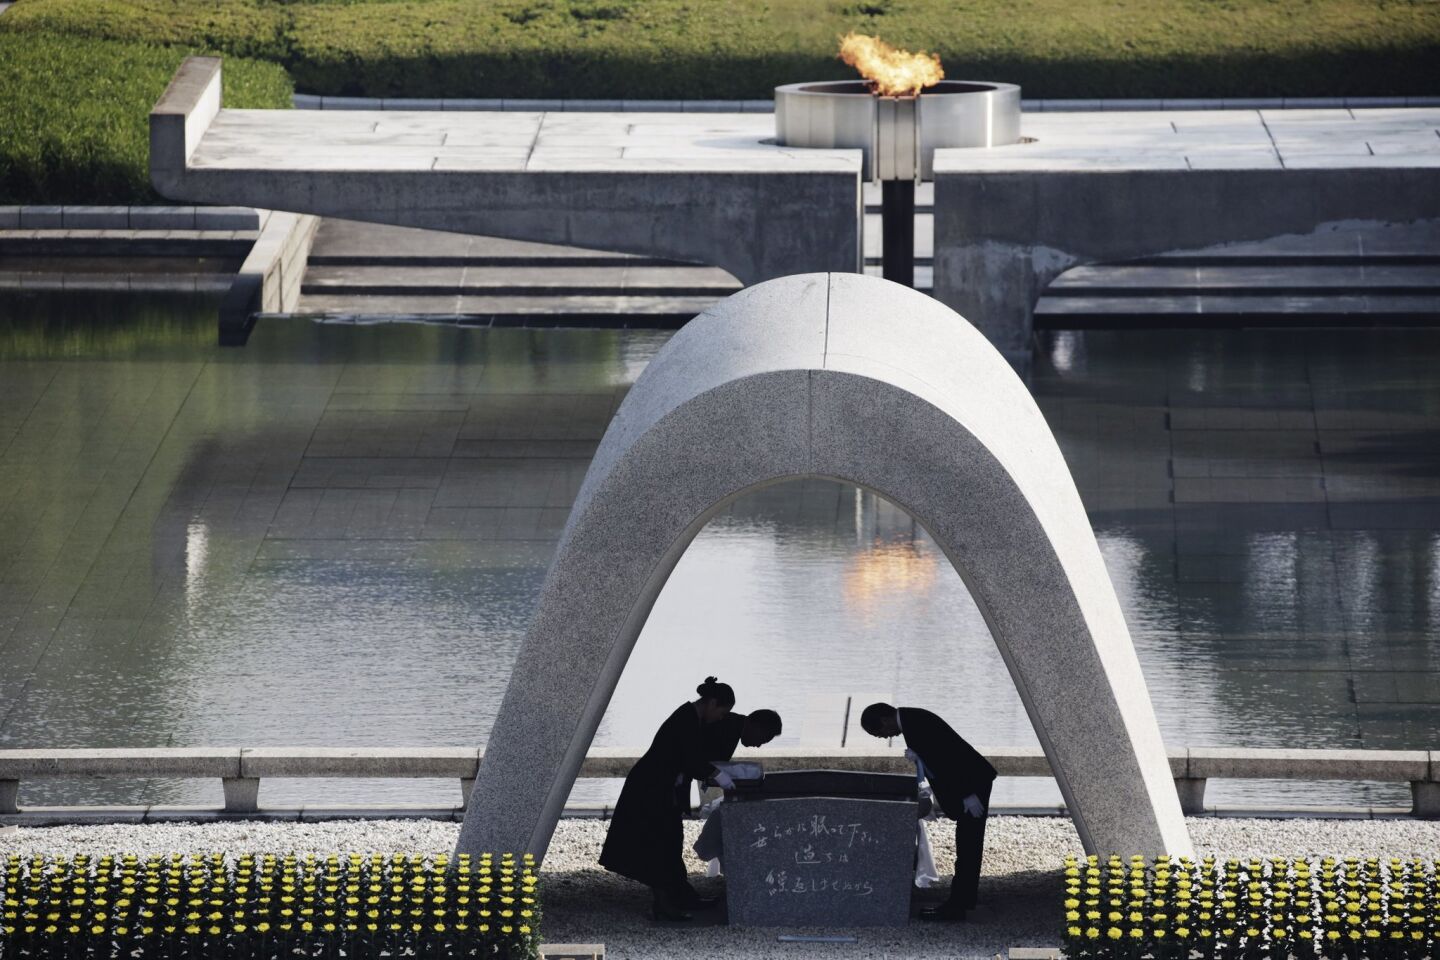 70th anniversary of the atomic bombing